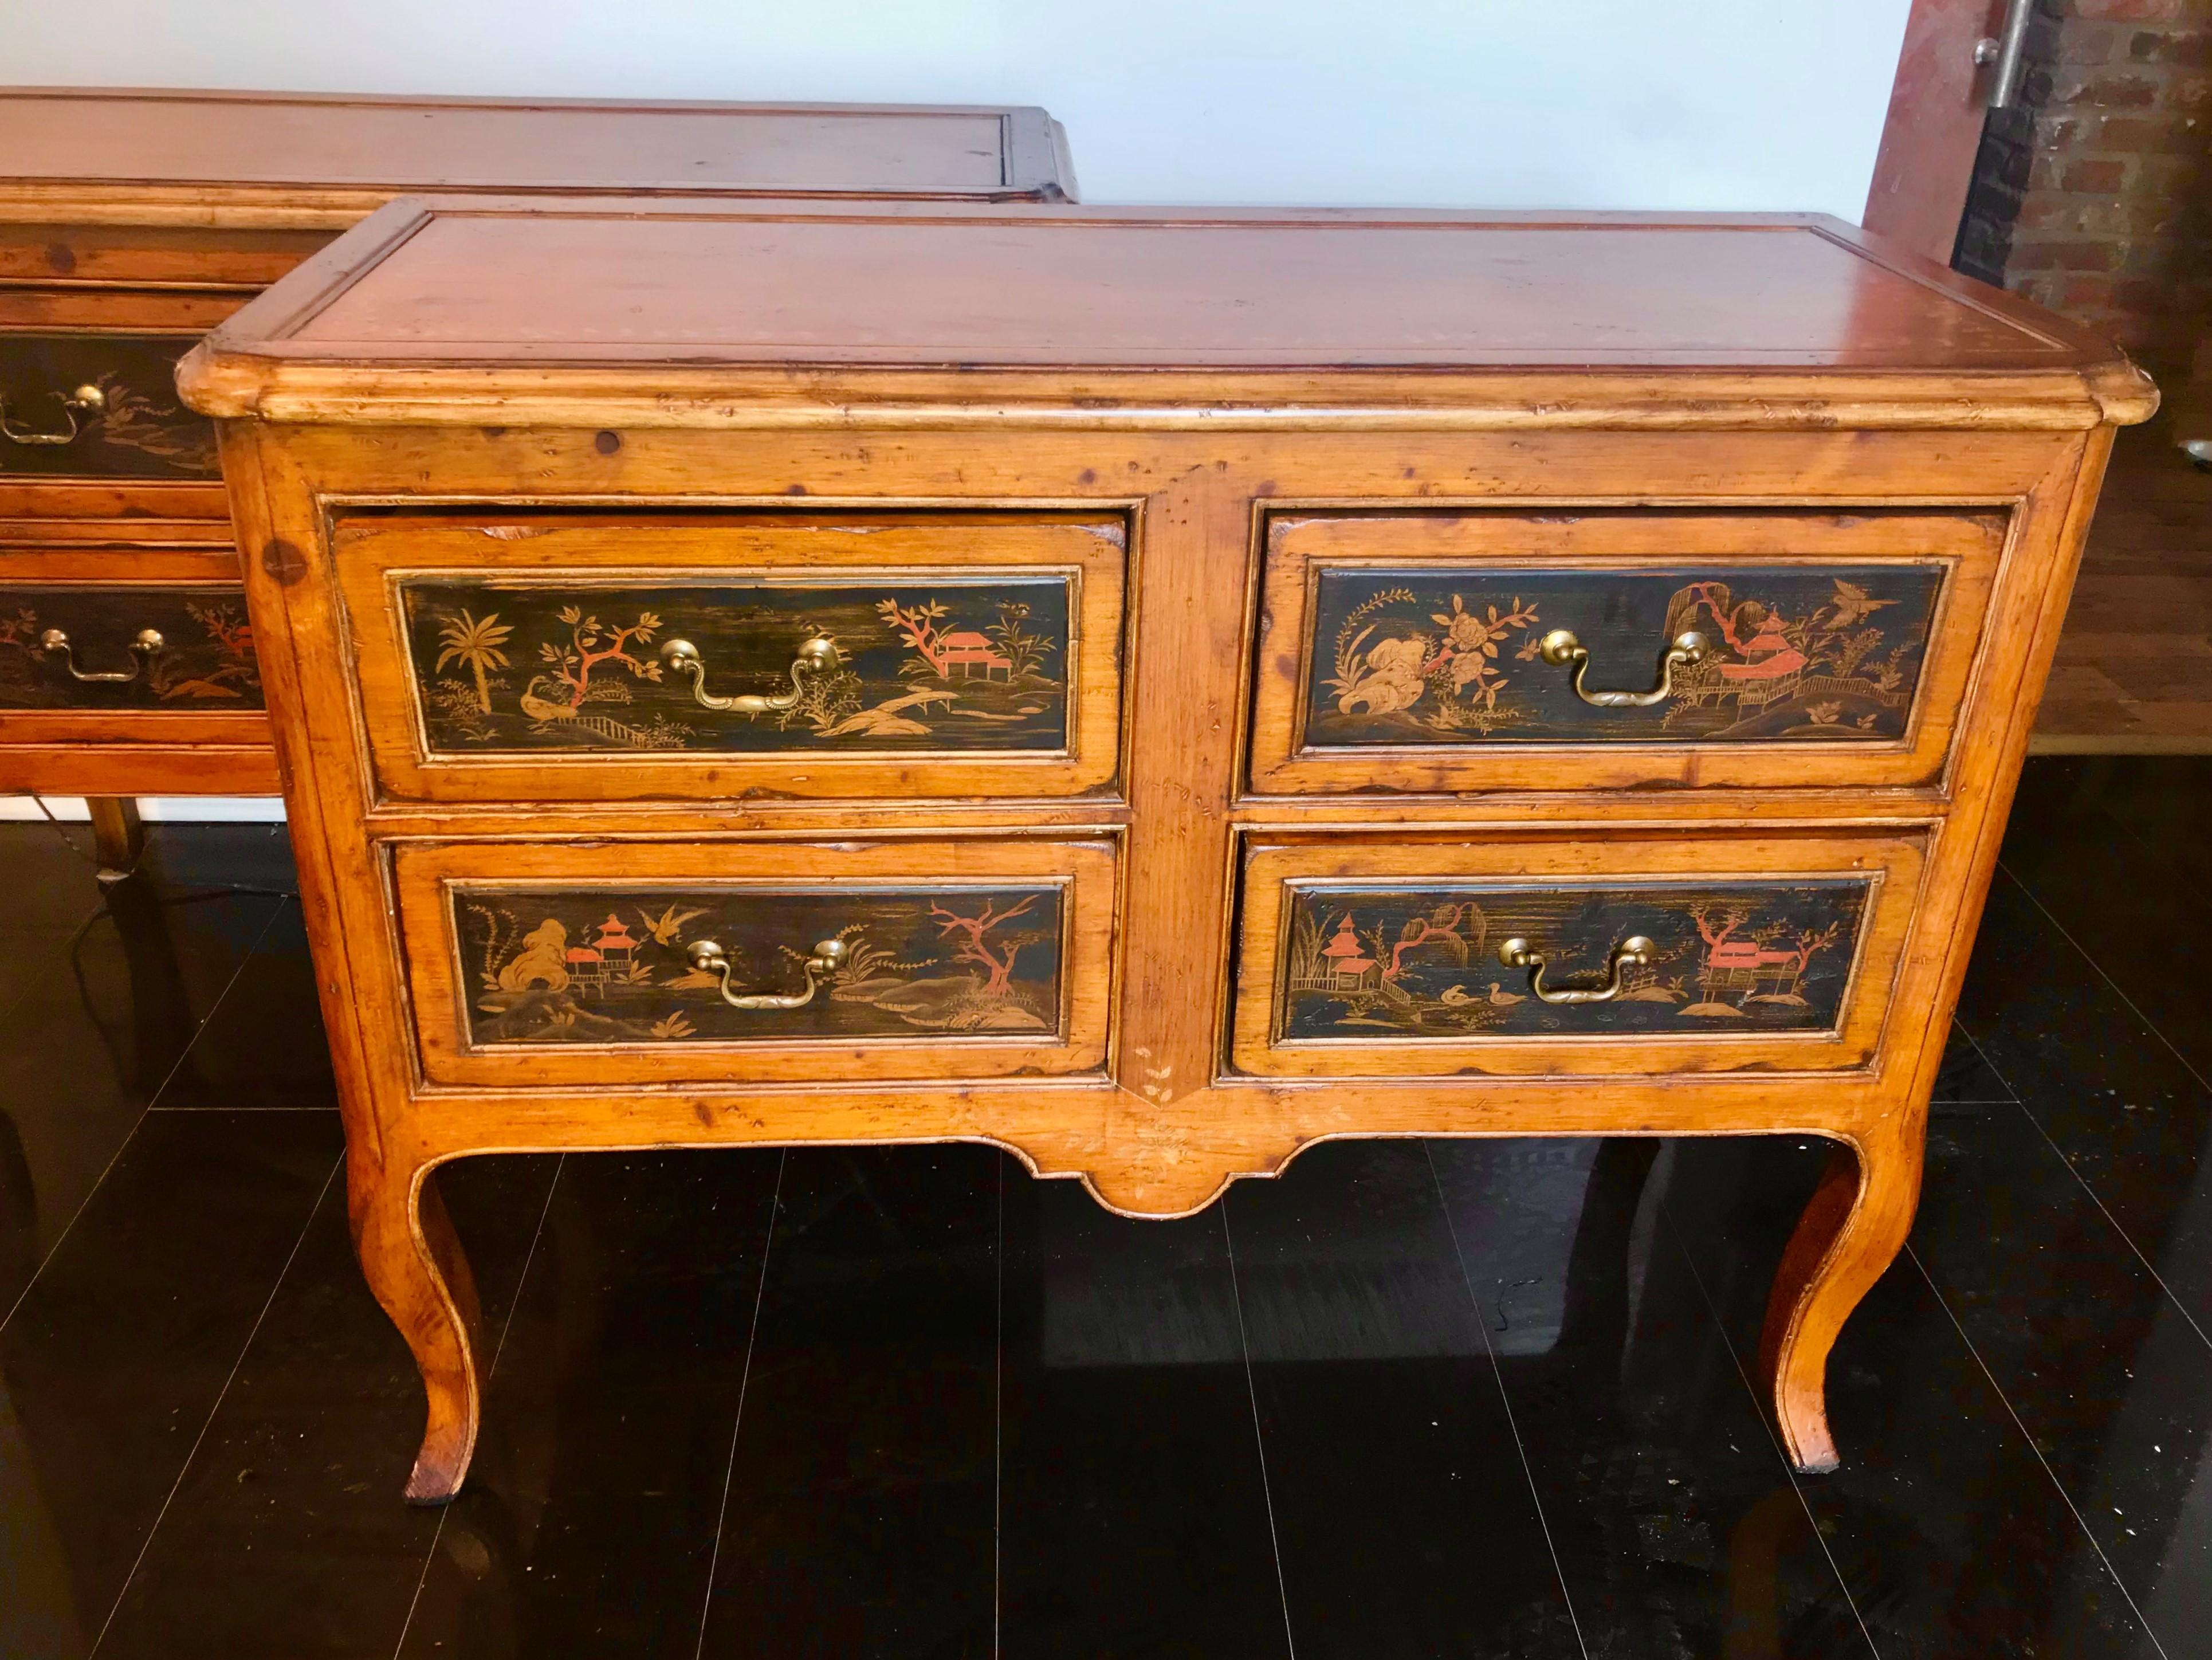 Of unusual French knotty pine and intentionally hand distressed .Each drawer with a very well done chinoiserie inset panel . Nice warm cognac color and patina . Distressed to give a warm provincial appeal . Thick , shaped beveled edges. The top and